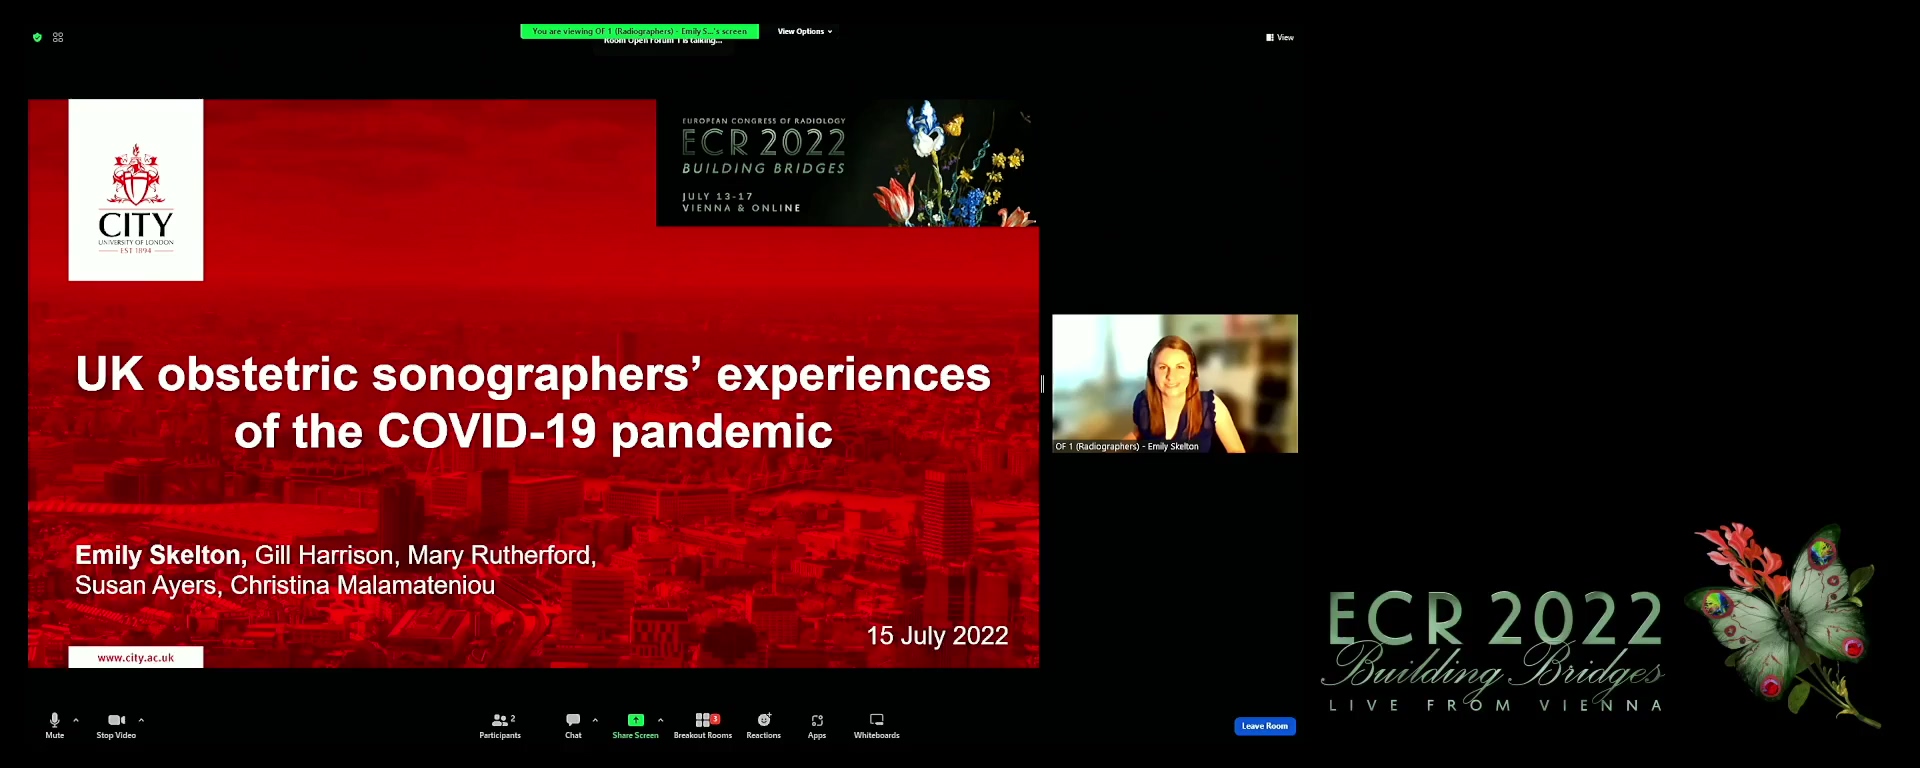 UK obstetric sonographers’ experiences of the Covid-19 pandemic: burnout, role satisfaction and impact on clinical practice - Emily Skelton, London / UK